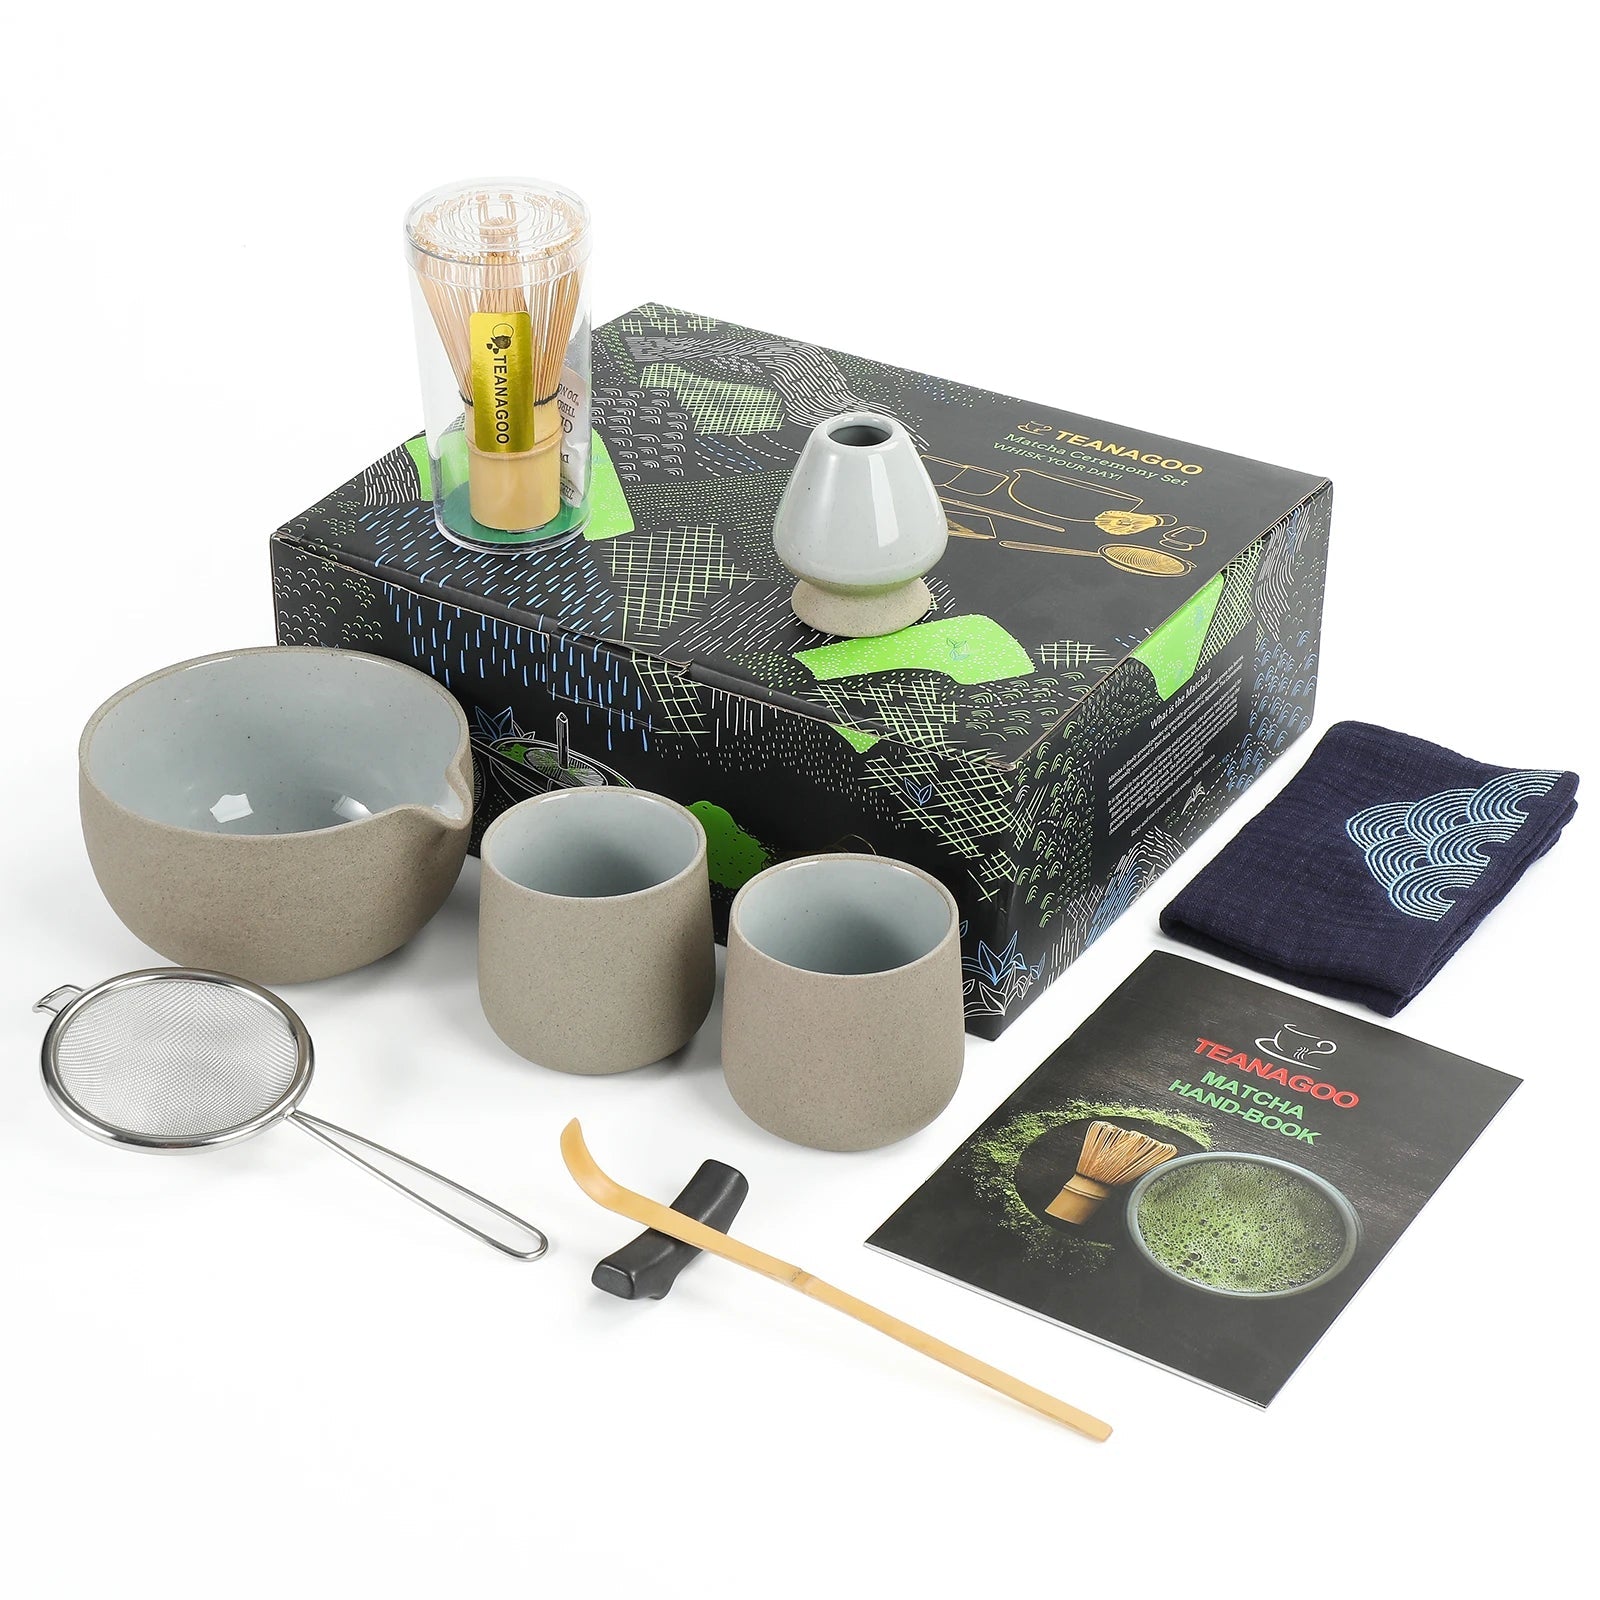 ALL COLOR OPTIONS Matcha Tea Set, Bowl With Spout, Bamboo Whisk